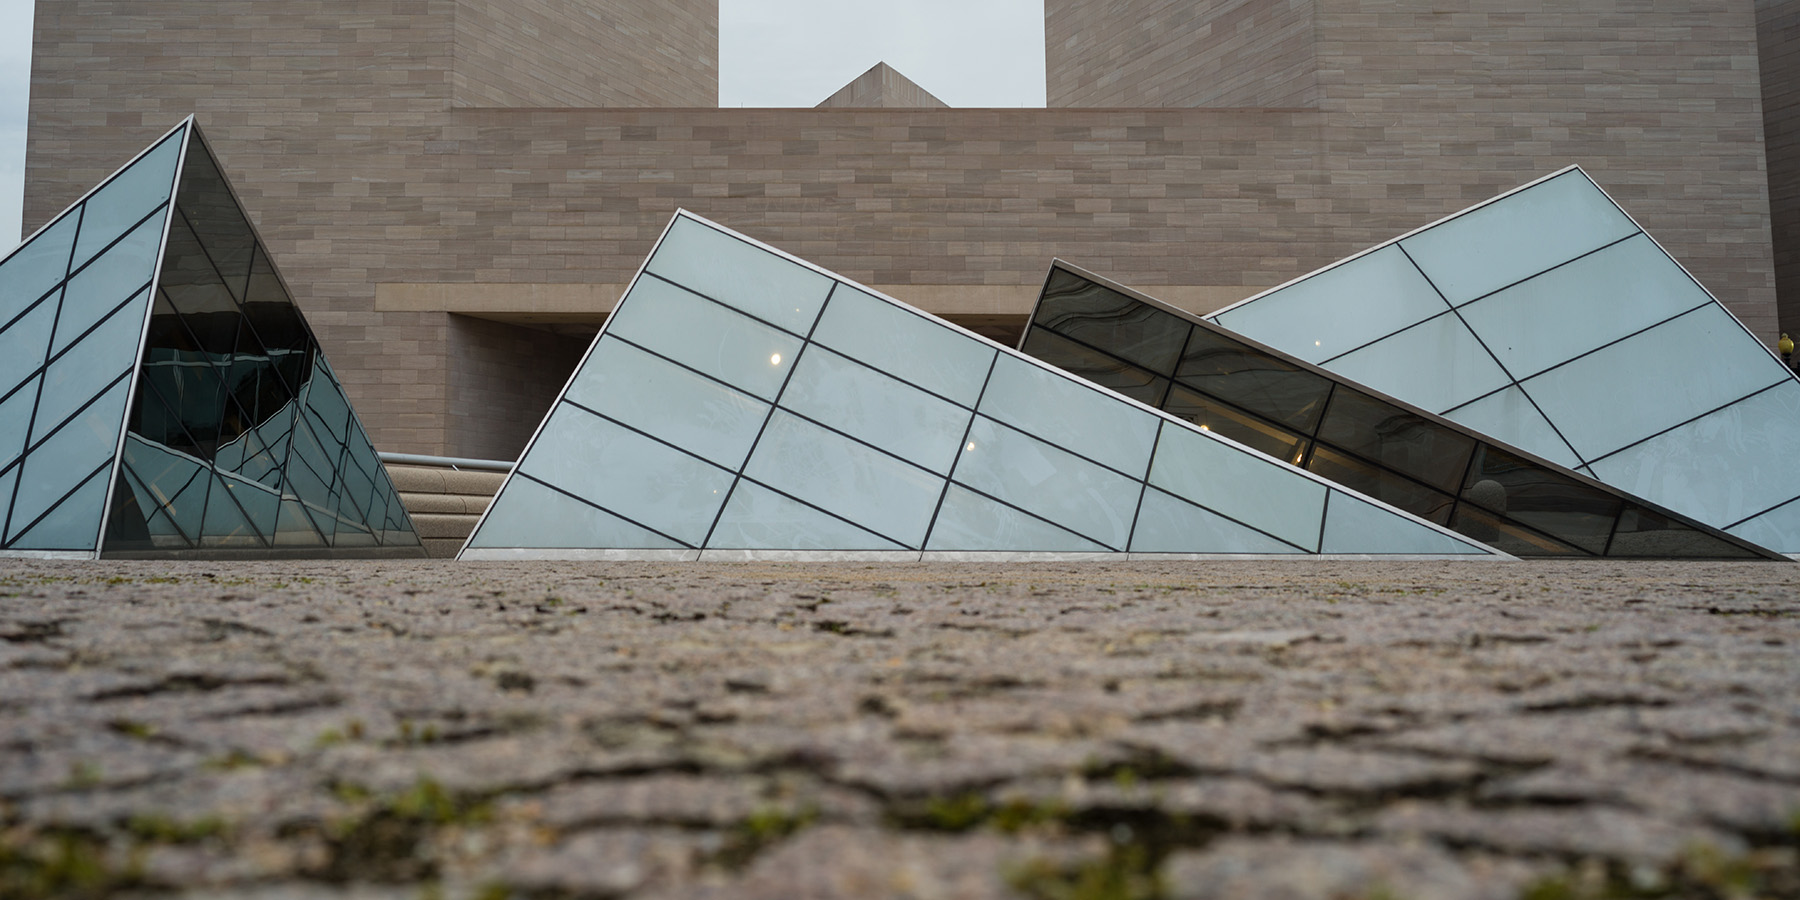 Ground view of the National Gallery's glass pyramids looking towards the East Building